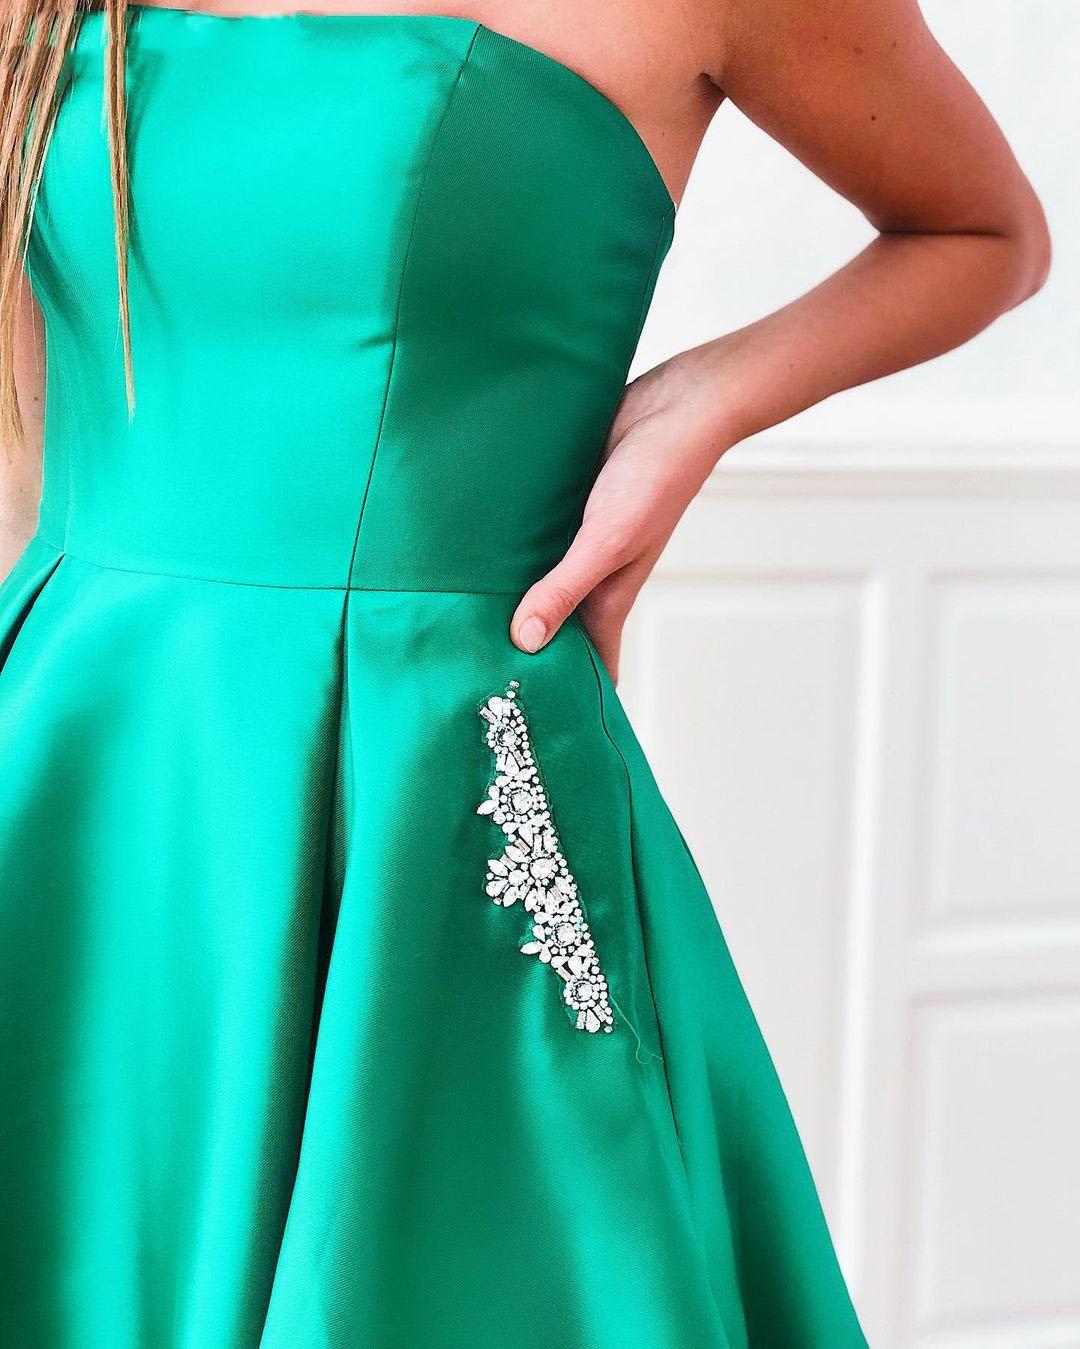 Green Homecoming Dresses with Pockets, hoco dress, Short Prom Dress, Formal Outfit, Back to School Party Gown